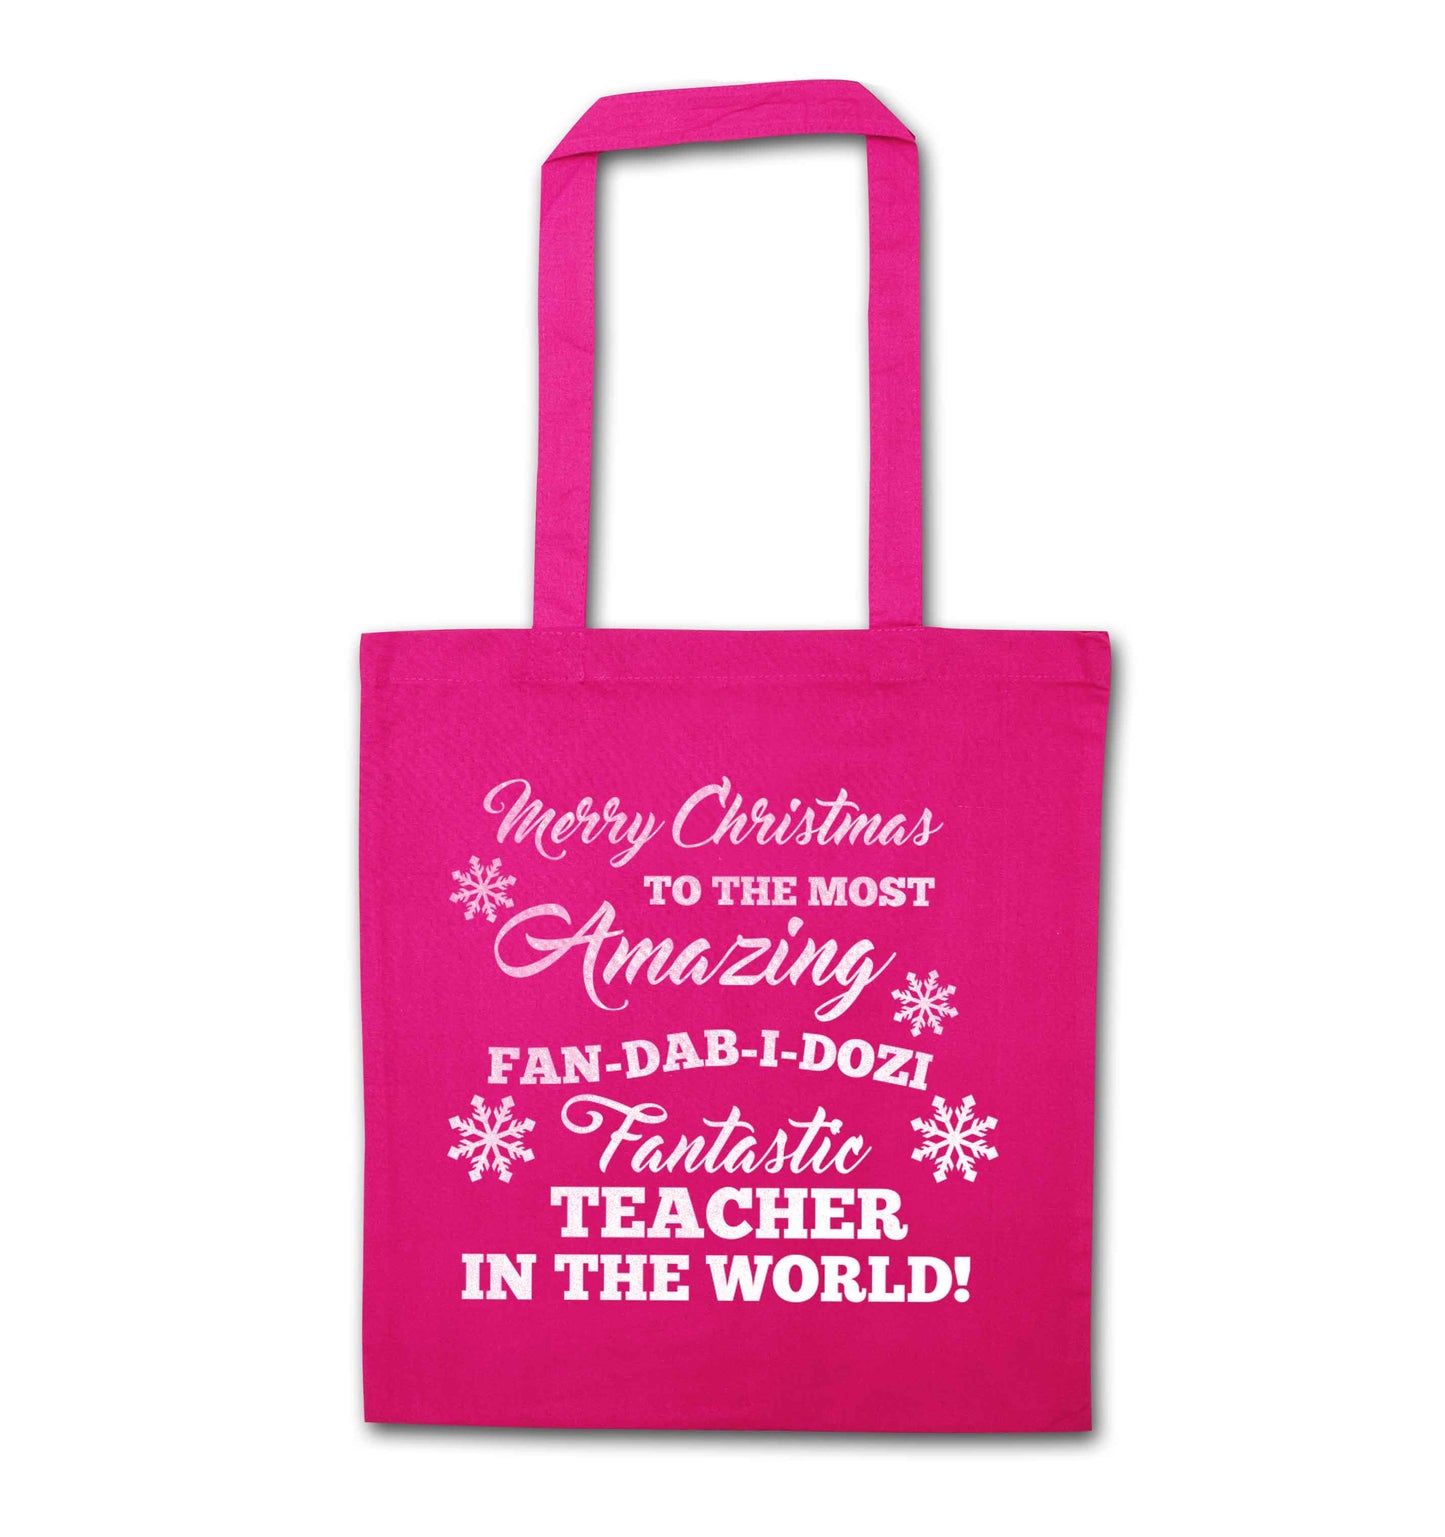 Merry Christmas to the most amazing fan-dab-i-dozi fantasic teacher in the world pink tote bag